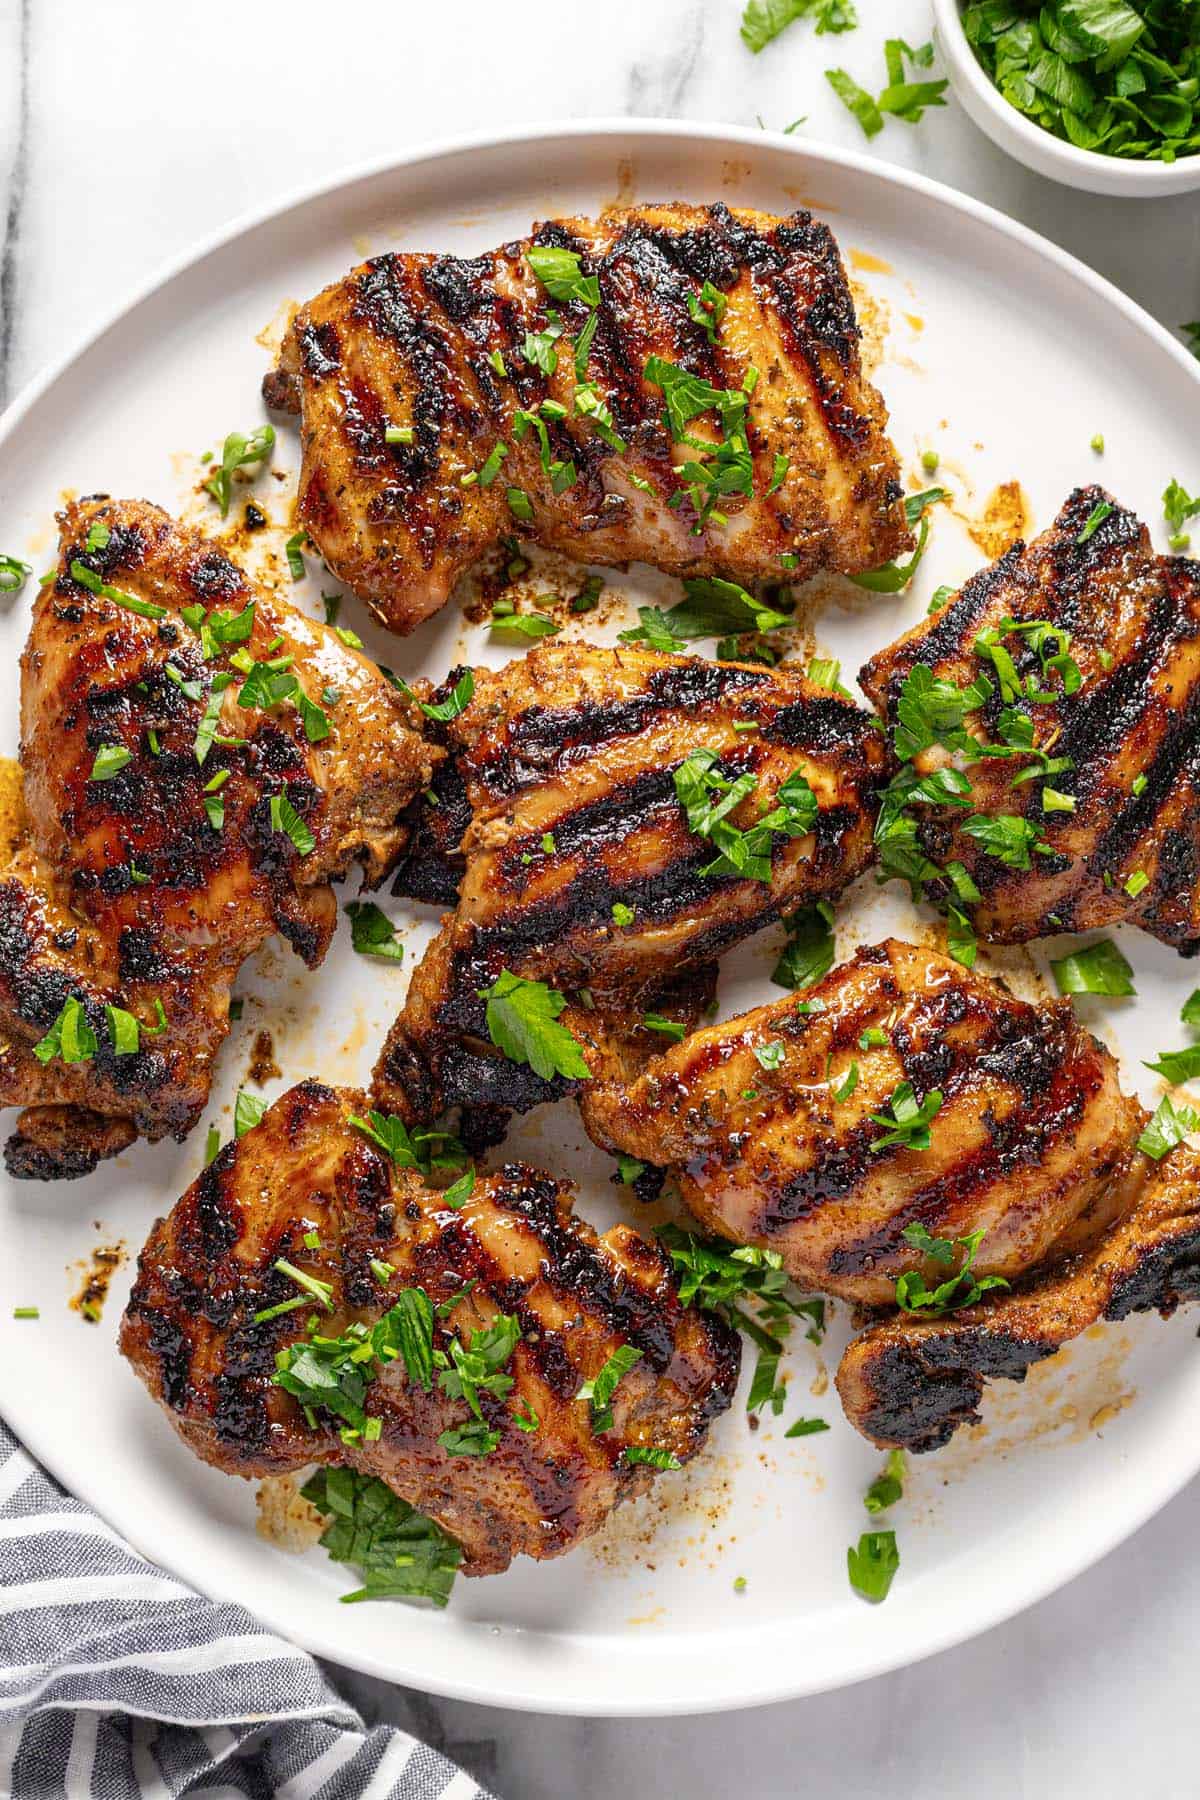 Round plate with 6 grilled chicken thighs garnished with fresh chopped parsley. 